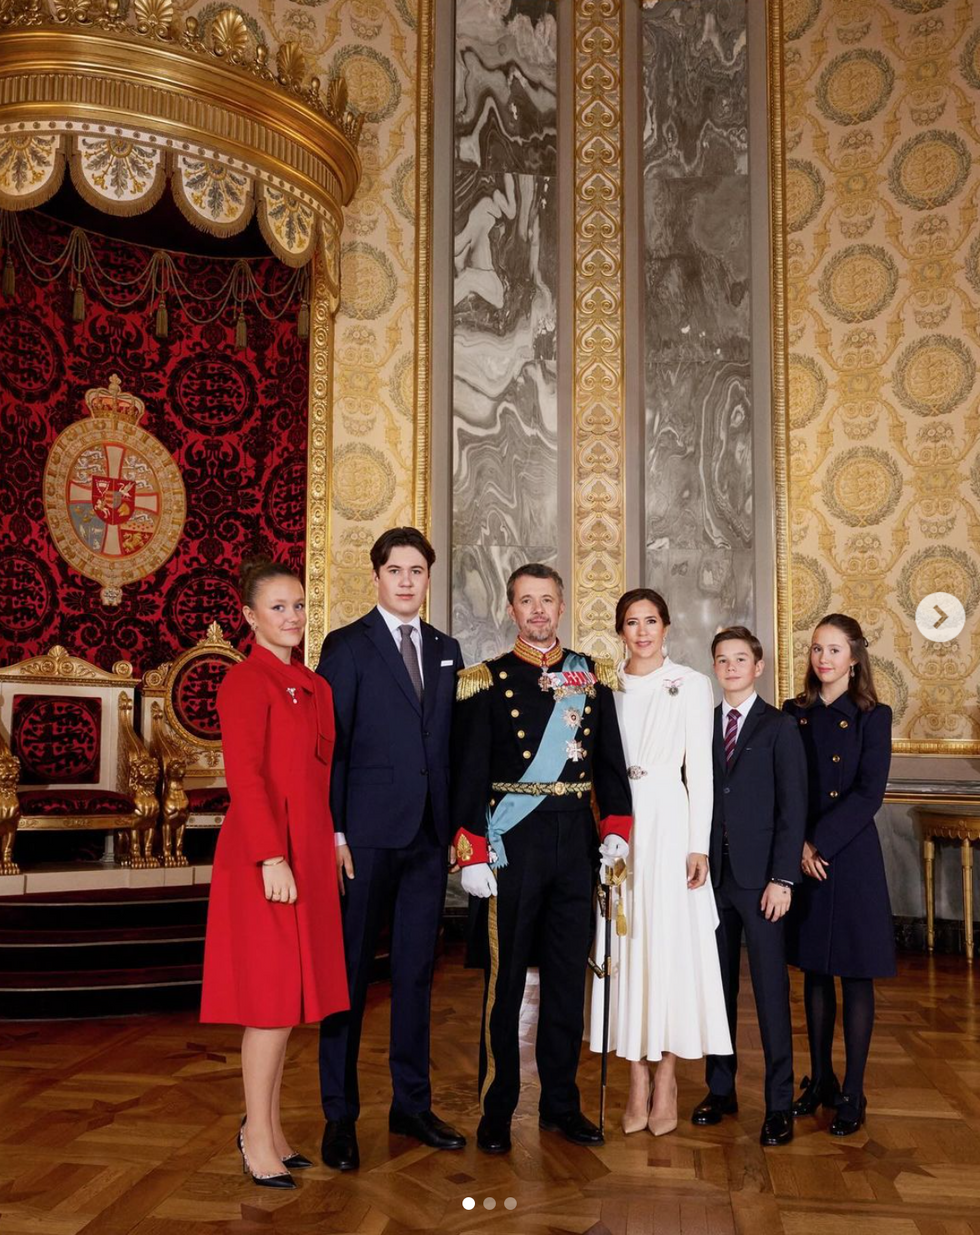 Princess Isabella, Prince Christian, King Frederik, Queen Mary, Prince Vincent and Princess Josephine.